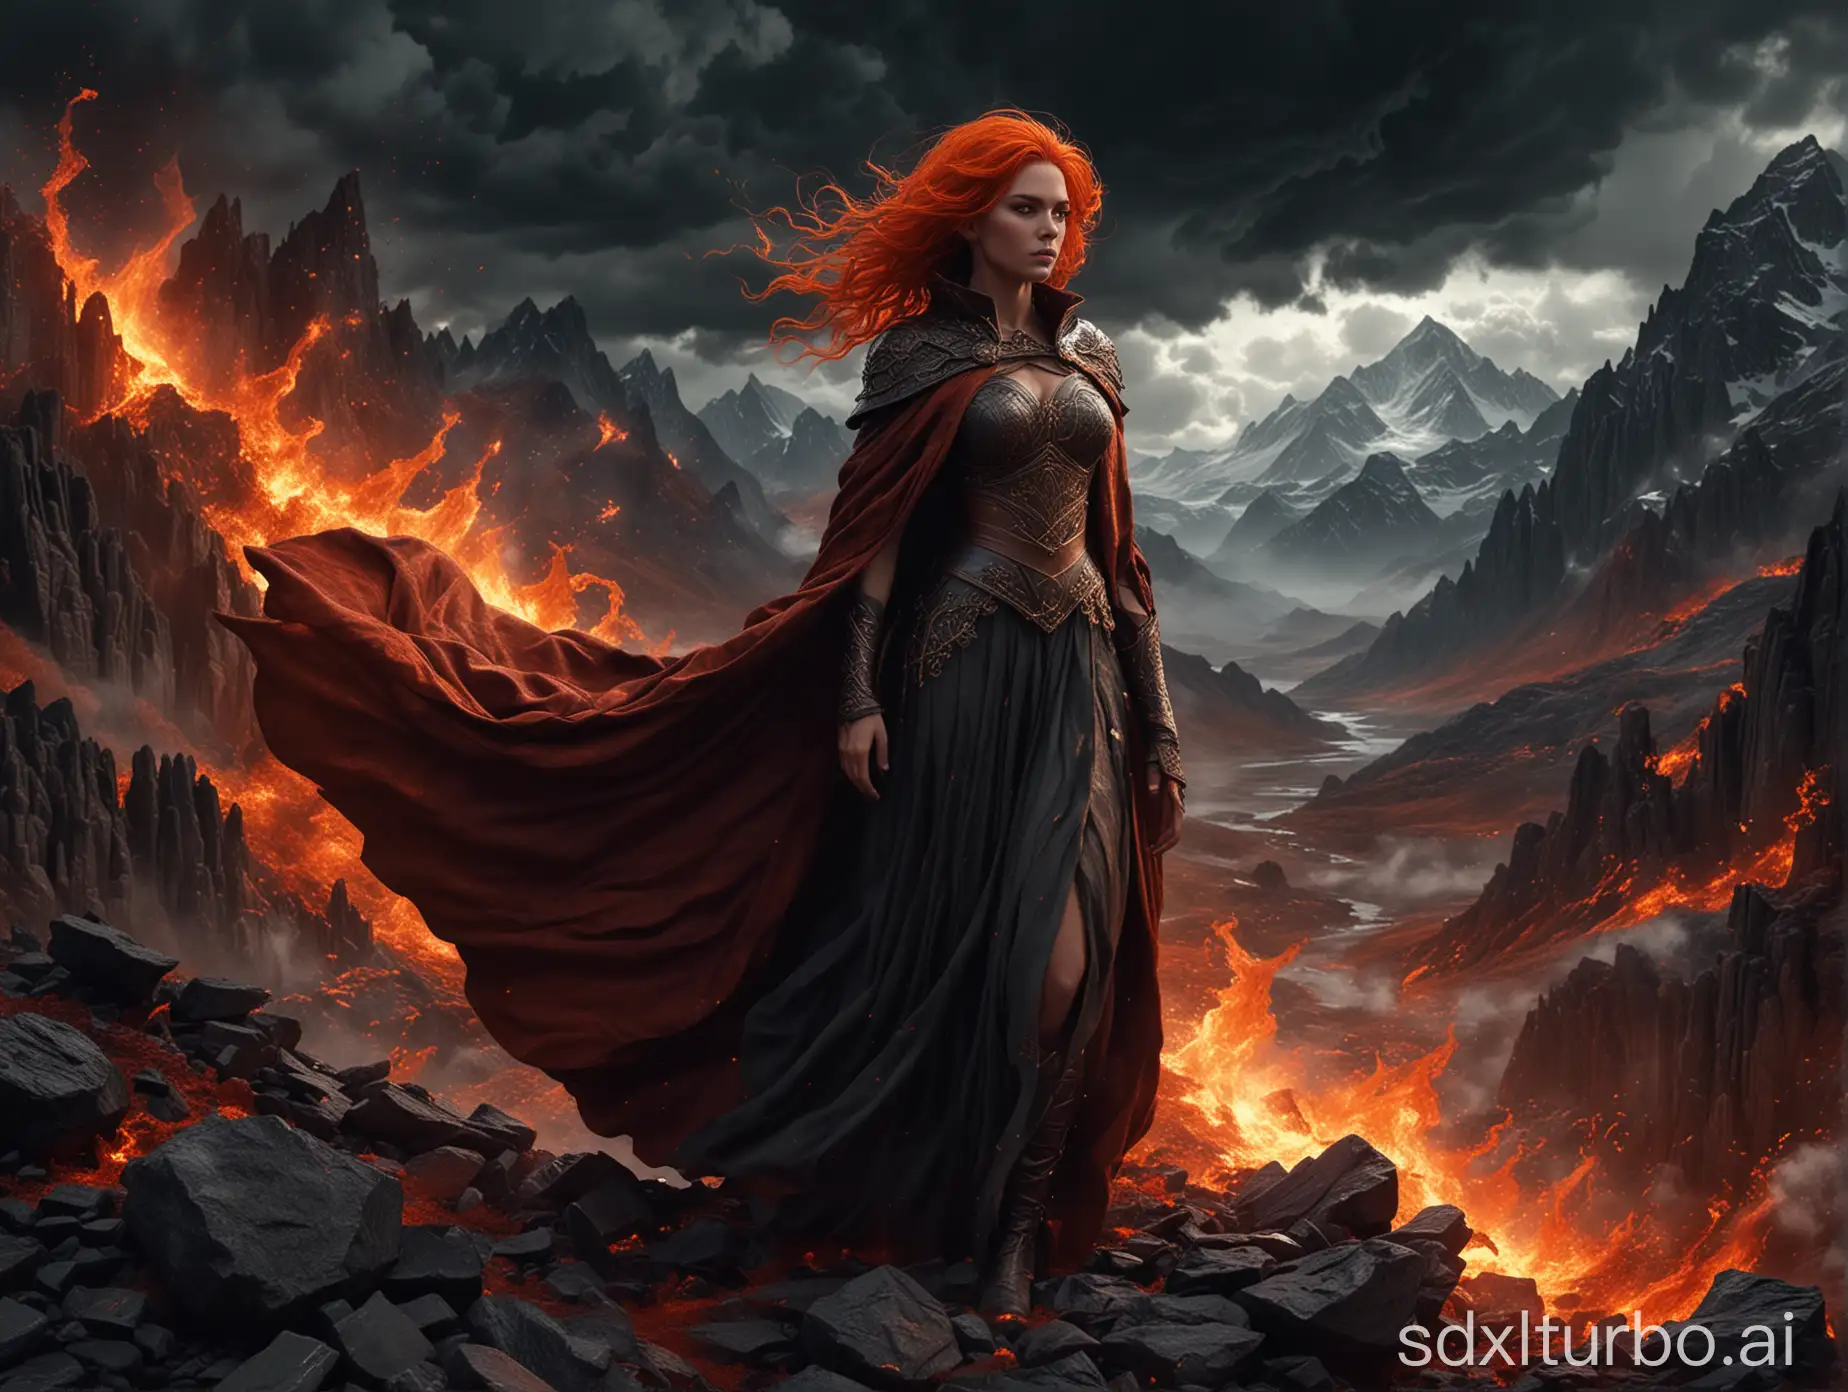 A captivating high-octane render of a mysterious woman enveloped in dark, fiery elements. Her fiery hair and cloak swirl around her, creating a dramatic effect amidst a turbulent backdrop. The intricate details of her outfit and the intense intensity of the embers make the image pop. The background is filled with a deep, dramatic landscape of swirling clouds and mountainous terrain. The high dynamic range and detailed rendering of the scene make this a striking and memorable image., 3d render, photo